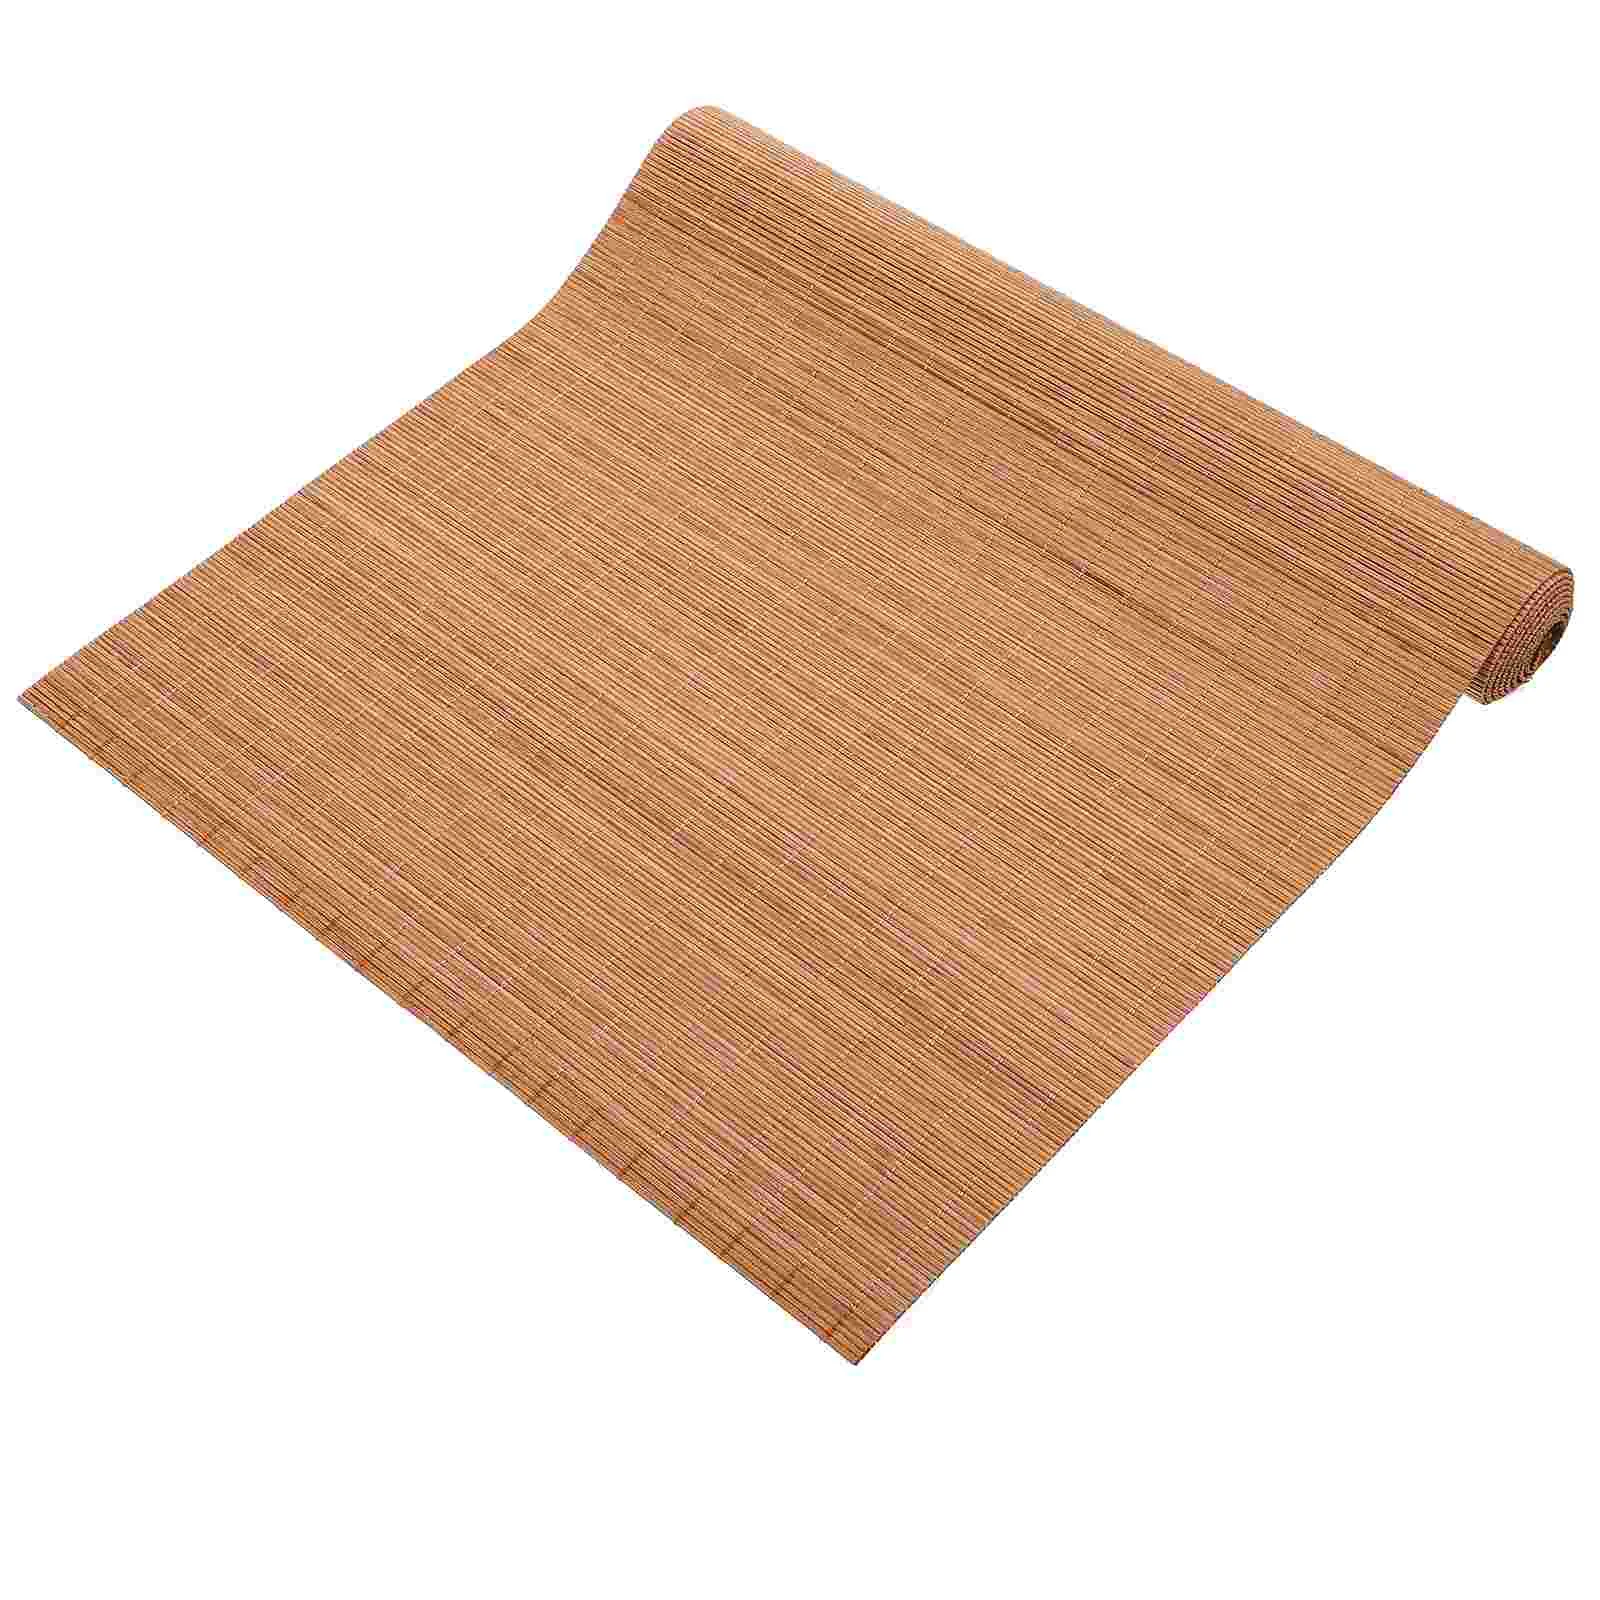 

Table Runner Tea Mat Fu Placemat Dining Wood Natural Tablecloth Rectangular Cover Placemats Woven House Rustic Curtain Covers